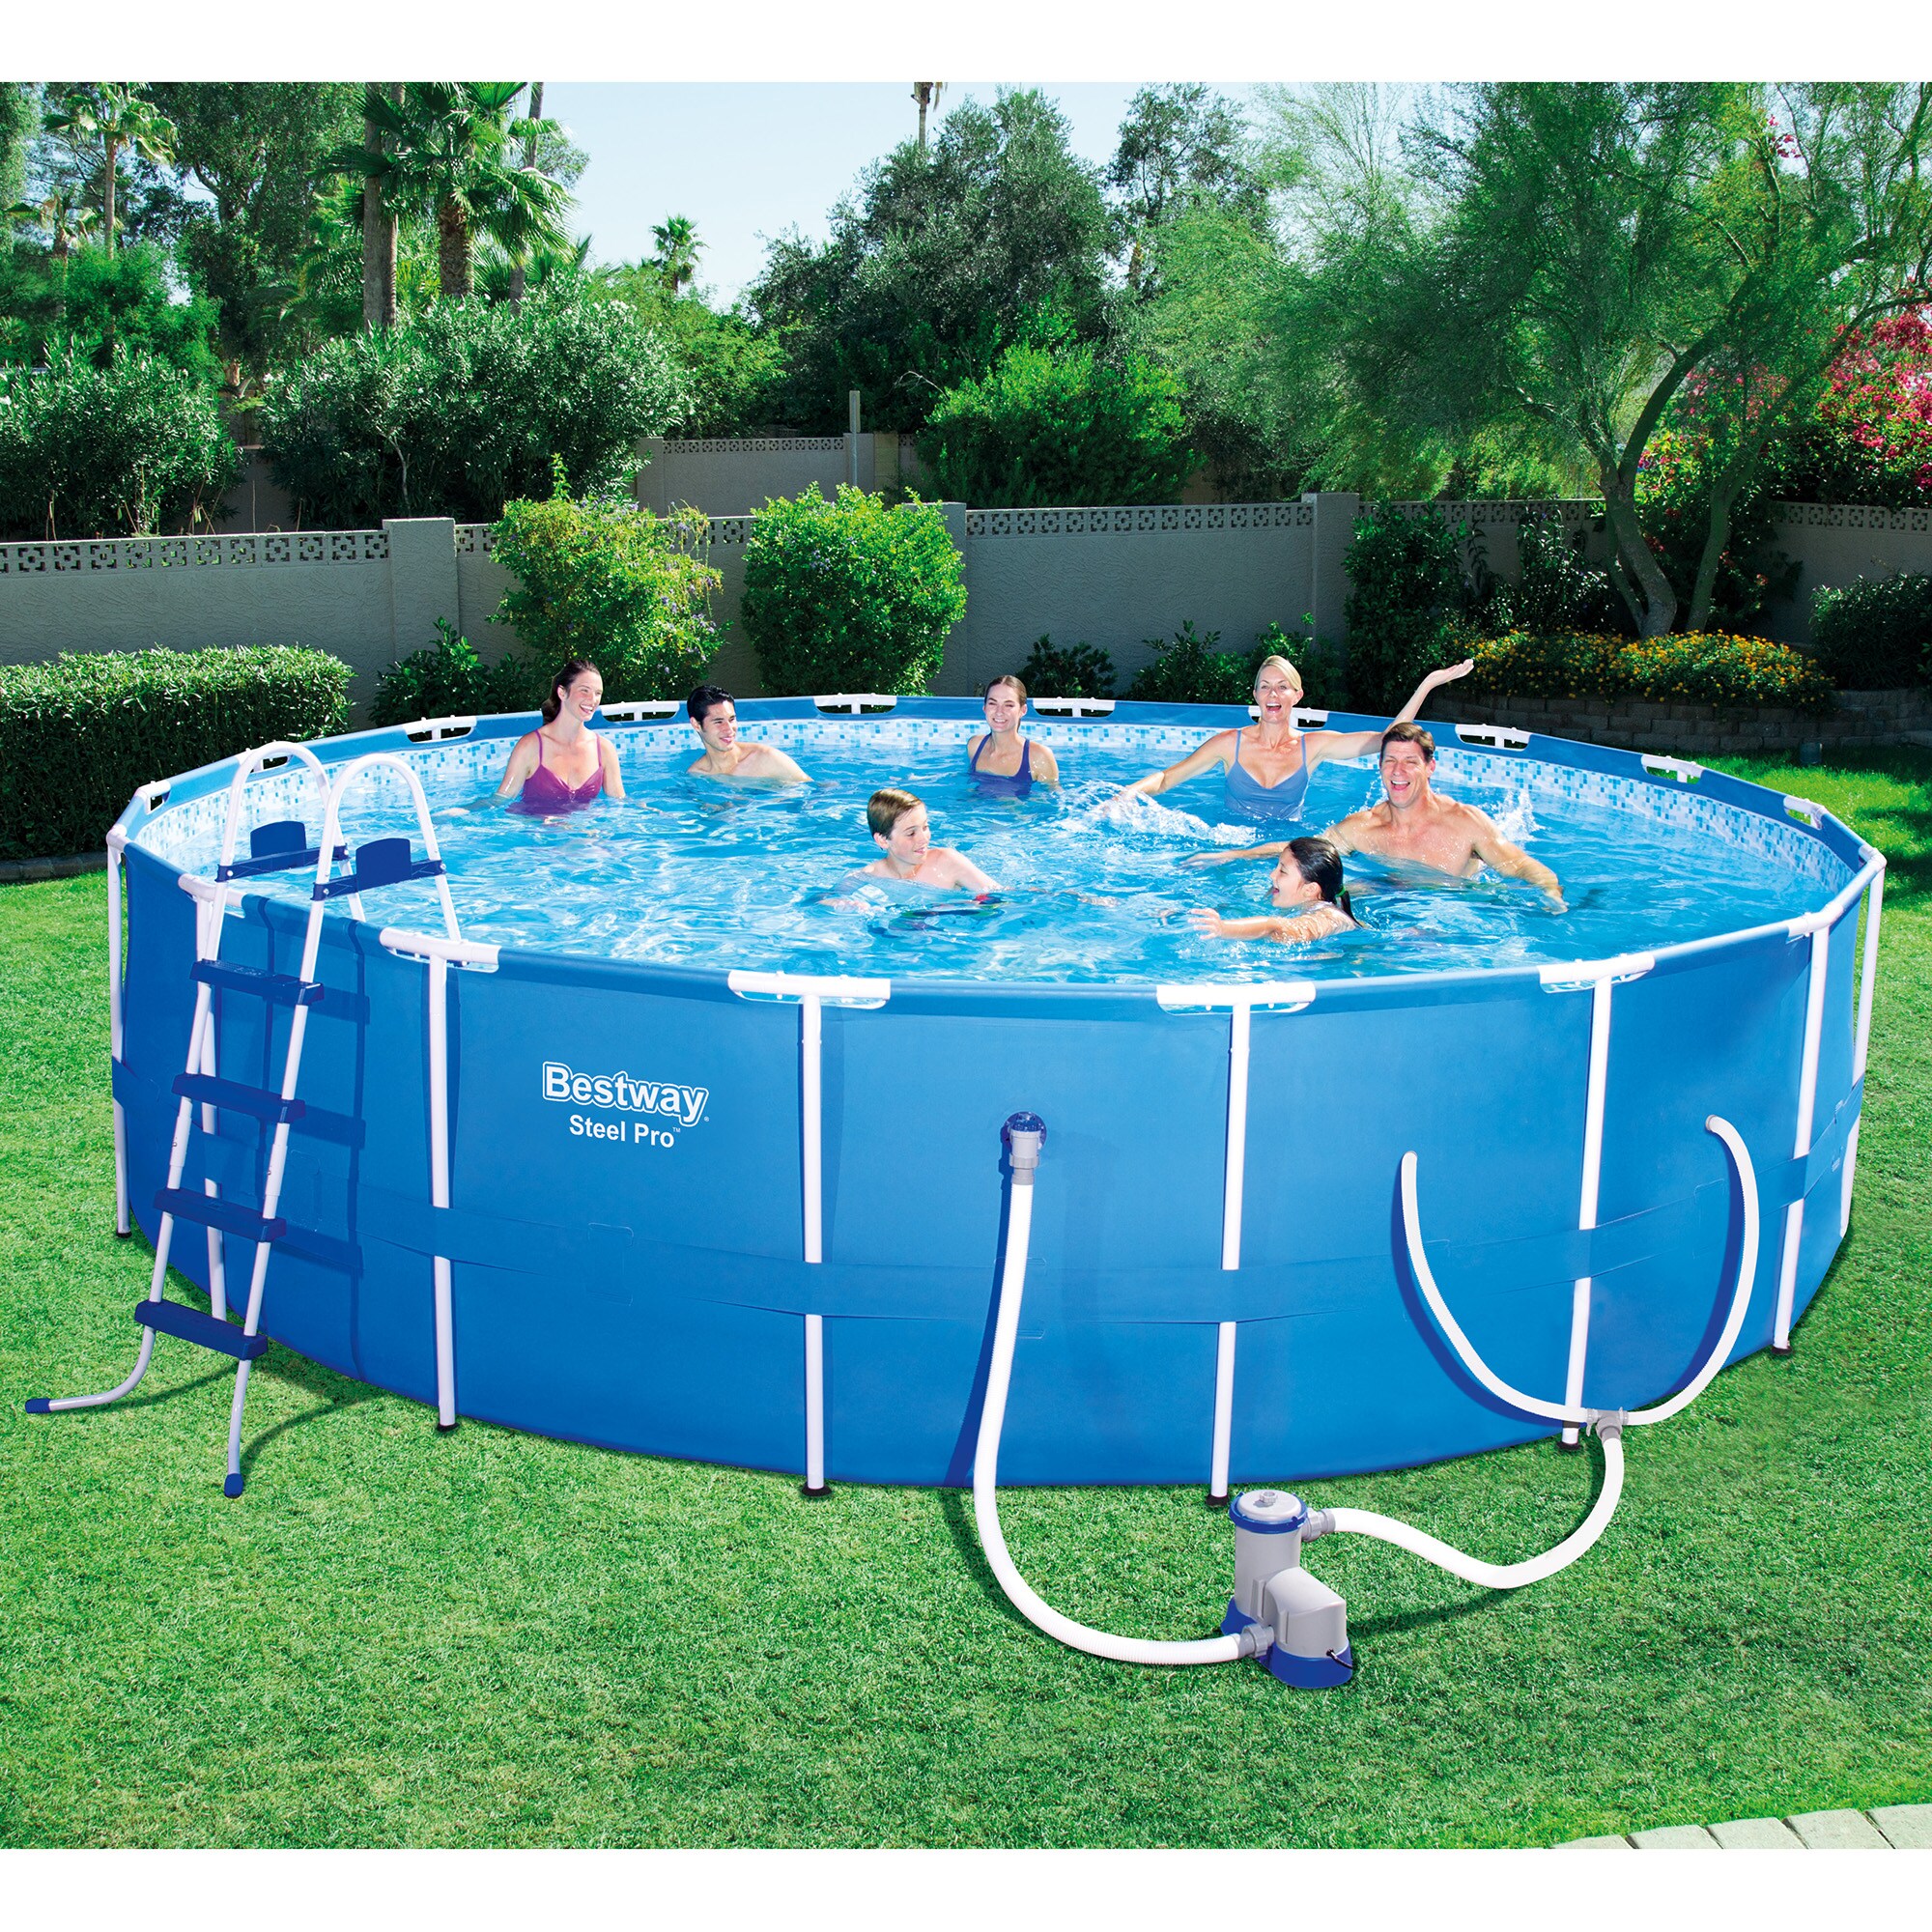 Bestway 18-ft x 18-ft x 48-in Metal Frame Round Above-Ground Pool with ...